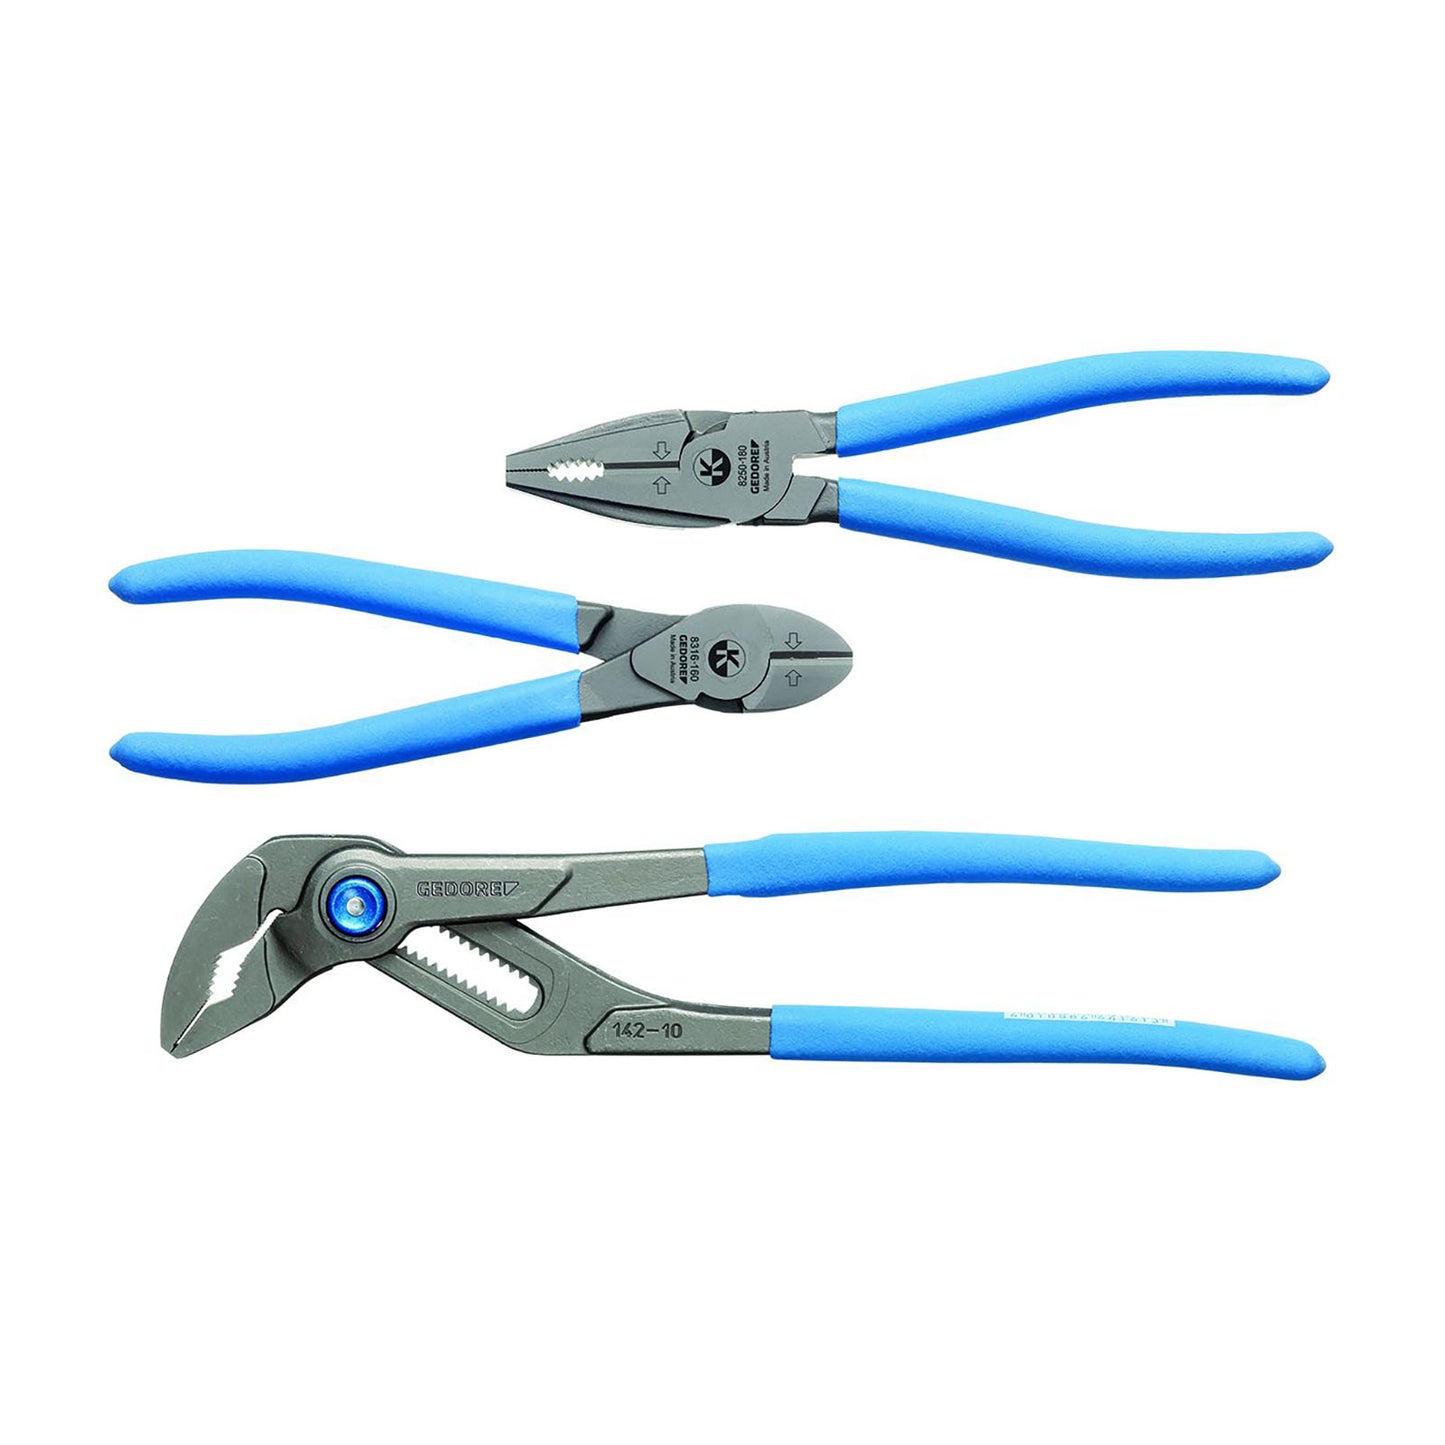 GEDORE S 8303 TL - Pliers Assortment, 3 Pieces (6703910)